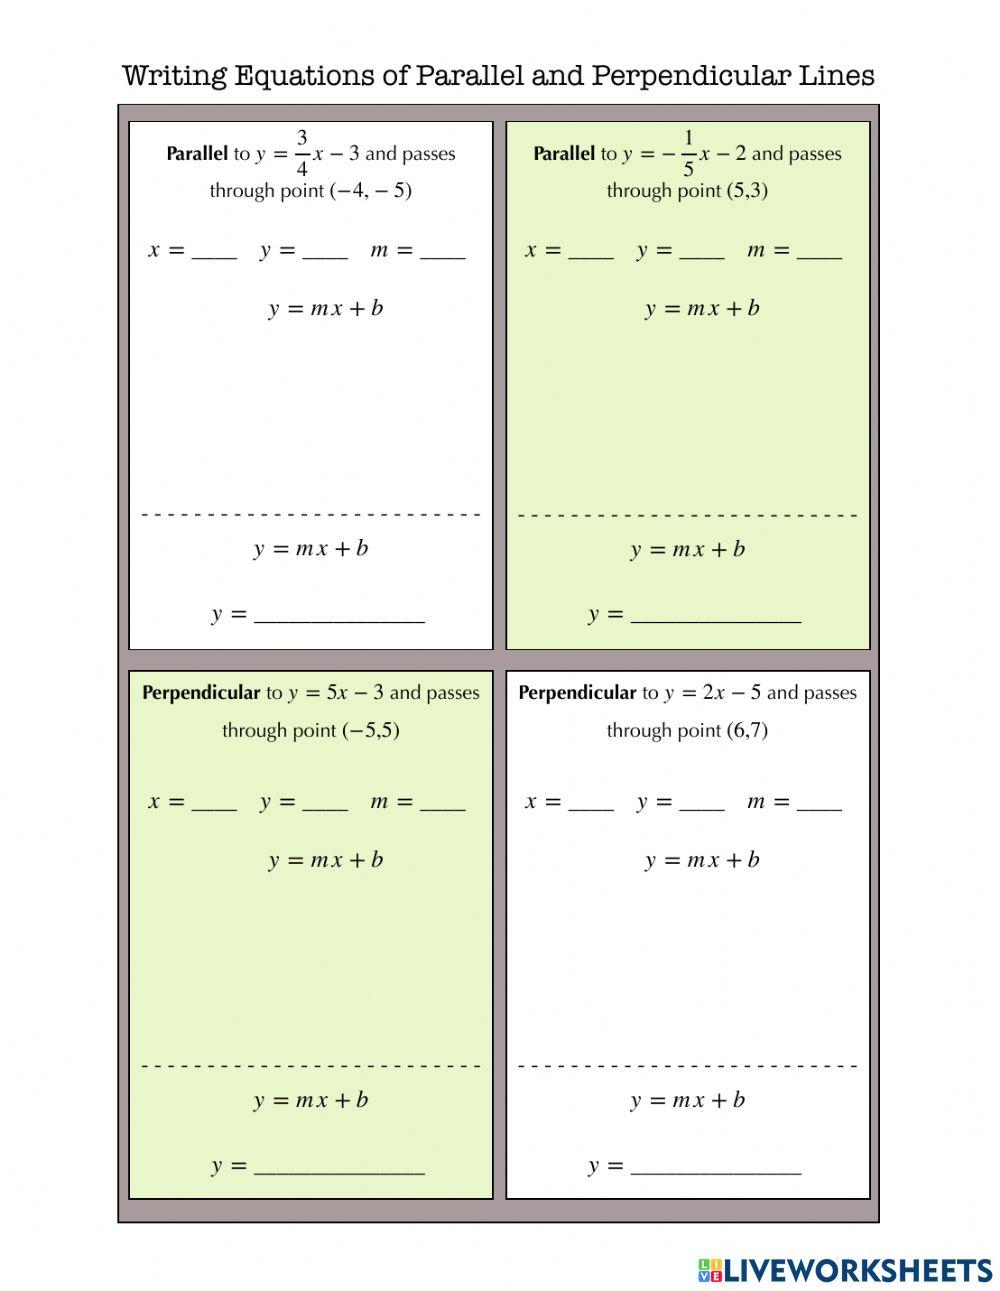 Writing Equations of Parallel and Perpendicular Lines Practice 2